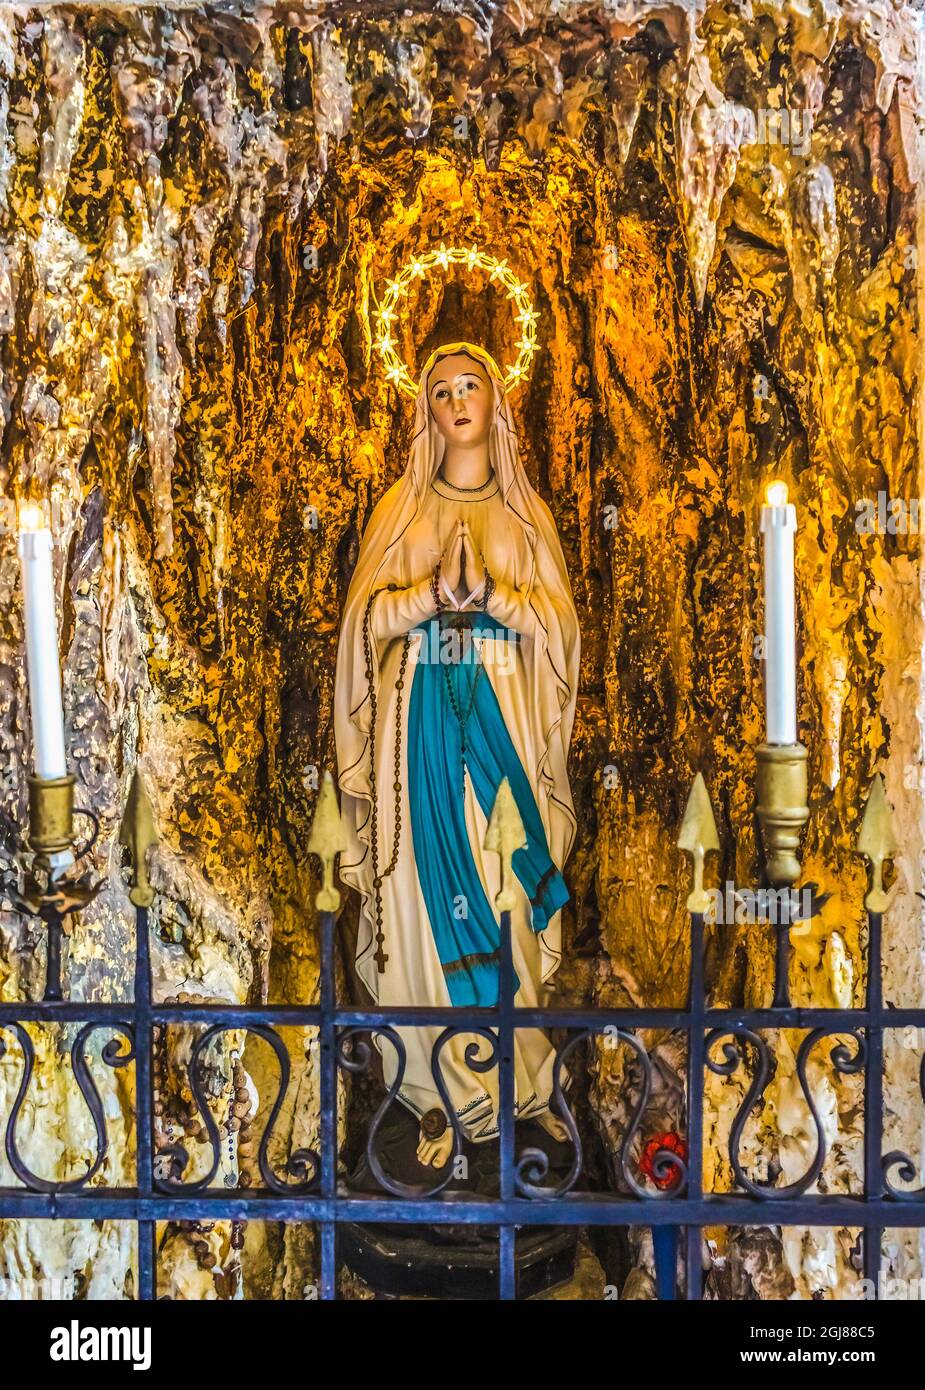 Illuminated Mary Statue, Church of San Raphael Angelo, Venice, Italy. Church completed 800 and most recently 1700's. (Editorial Use Only) Stock Photo